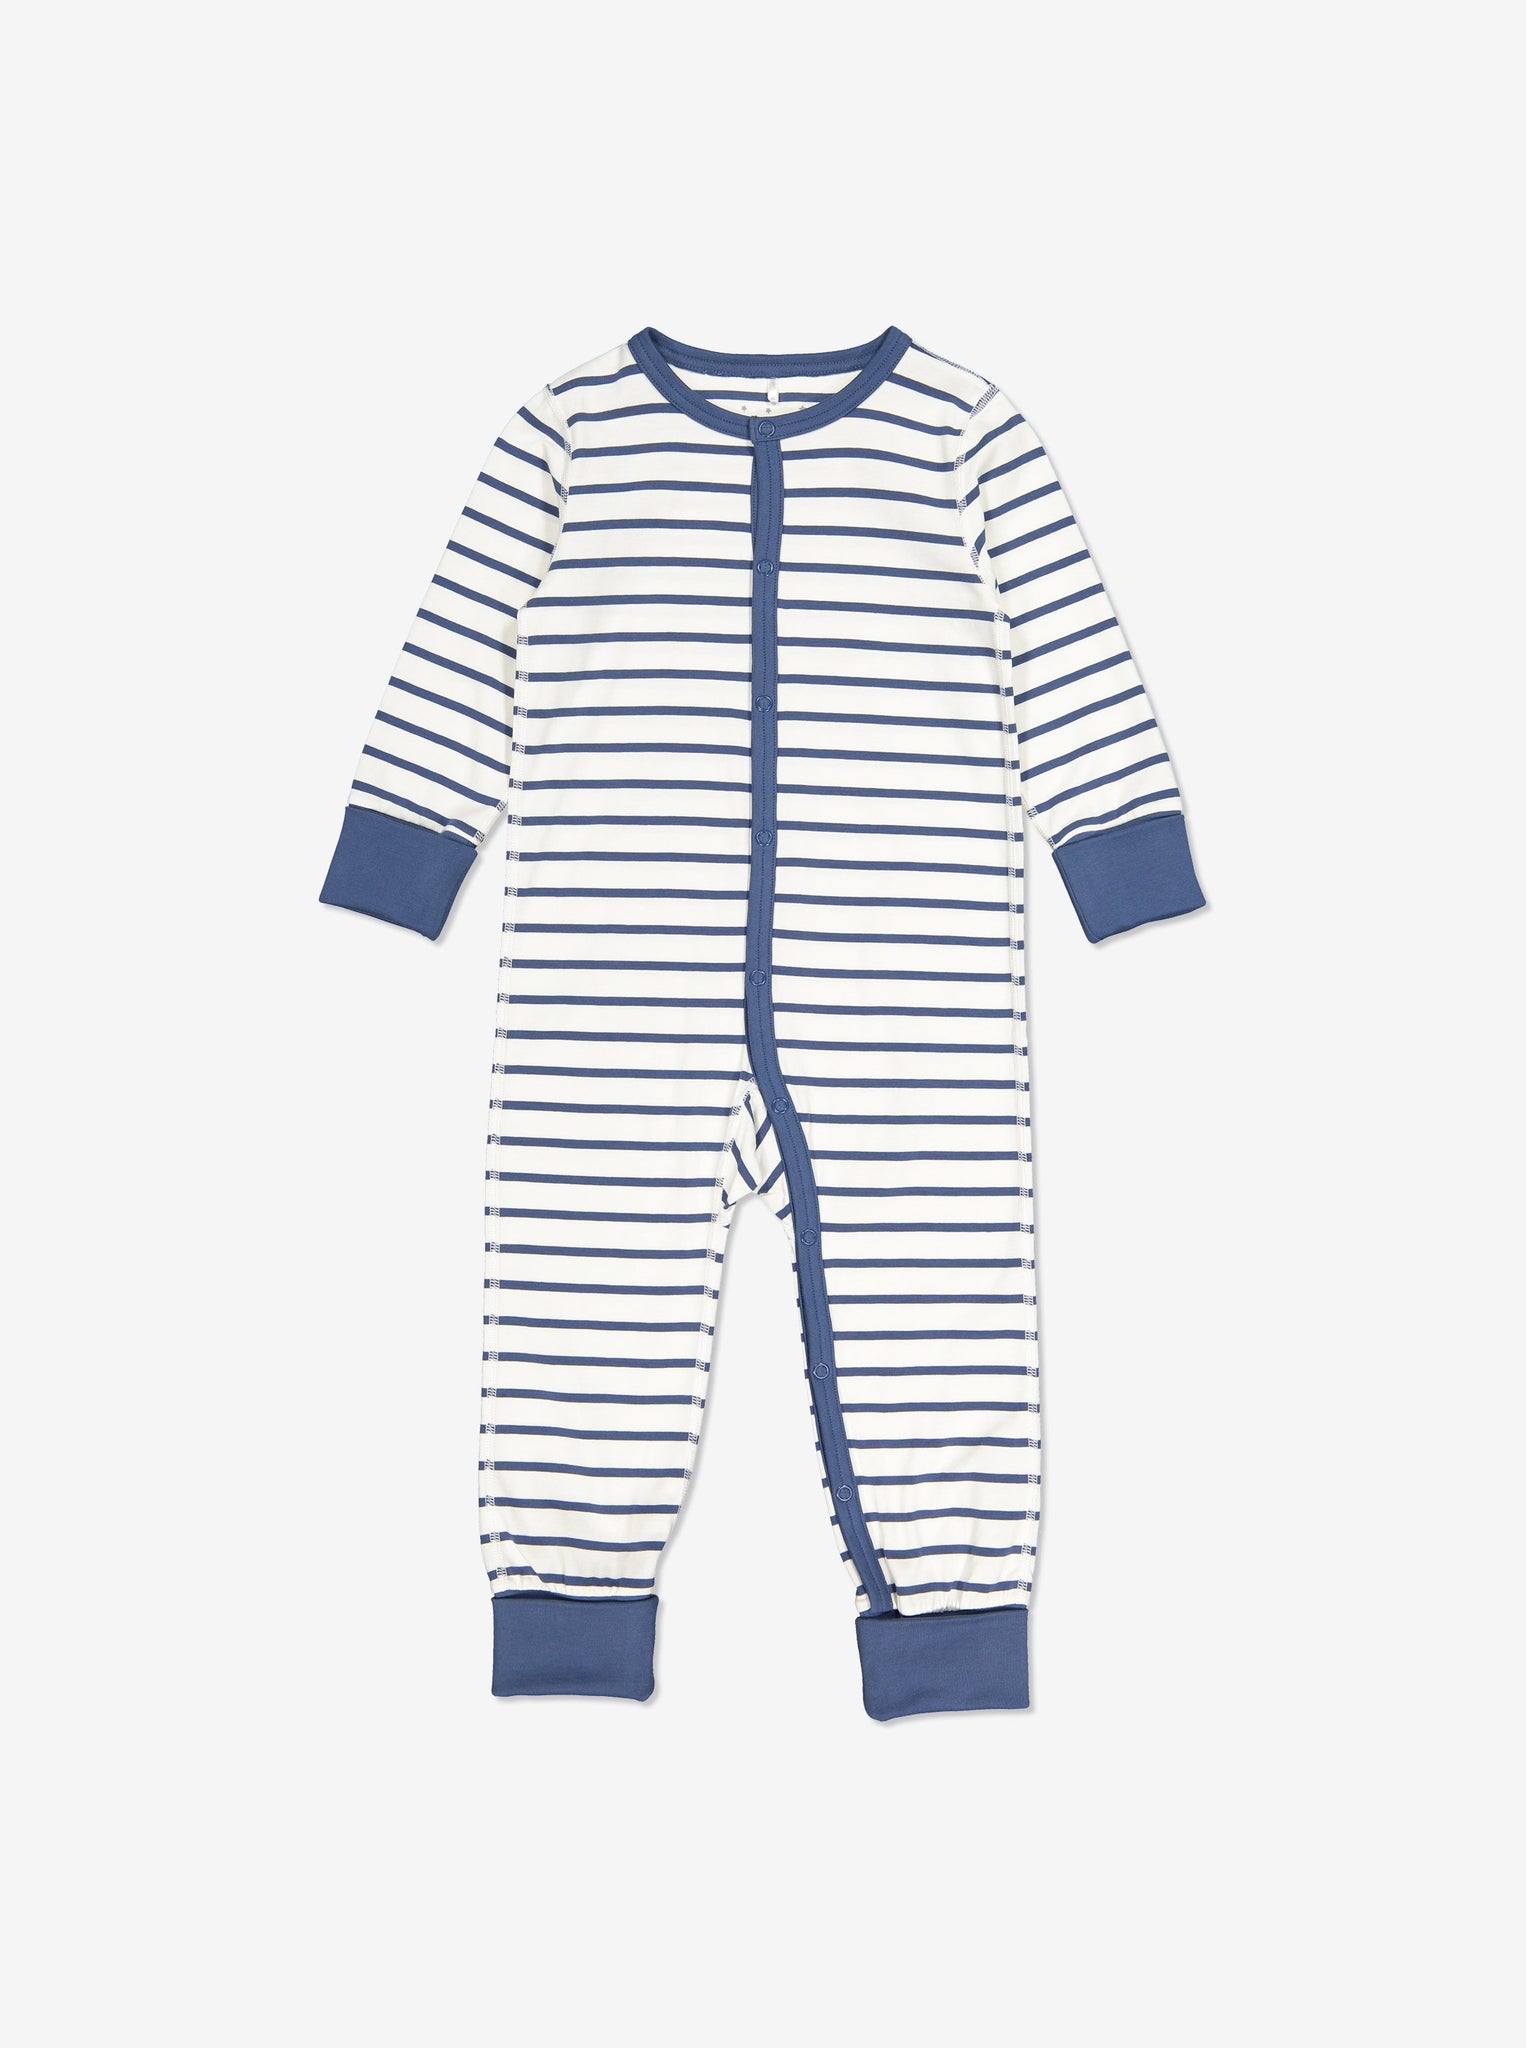 Onesie pyjamas for newborn to child, organic cotton womfortable and easy to use, ethical and long lasting polarn o. pyret 